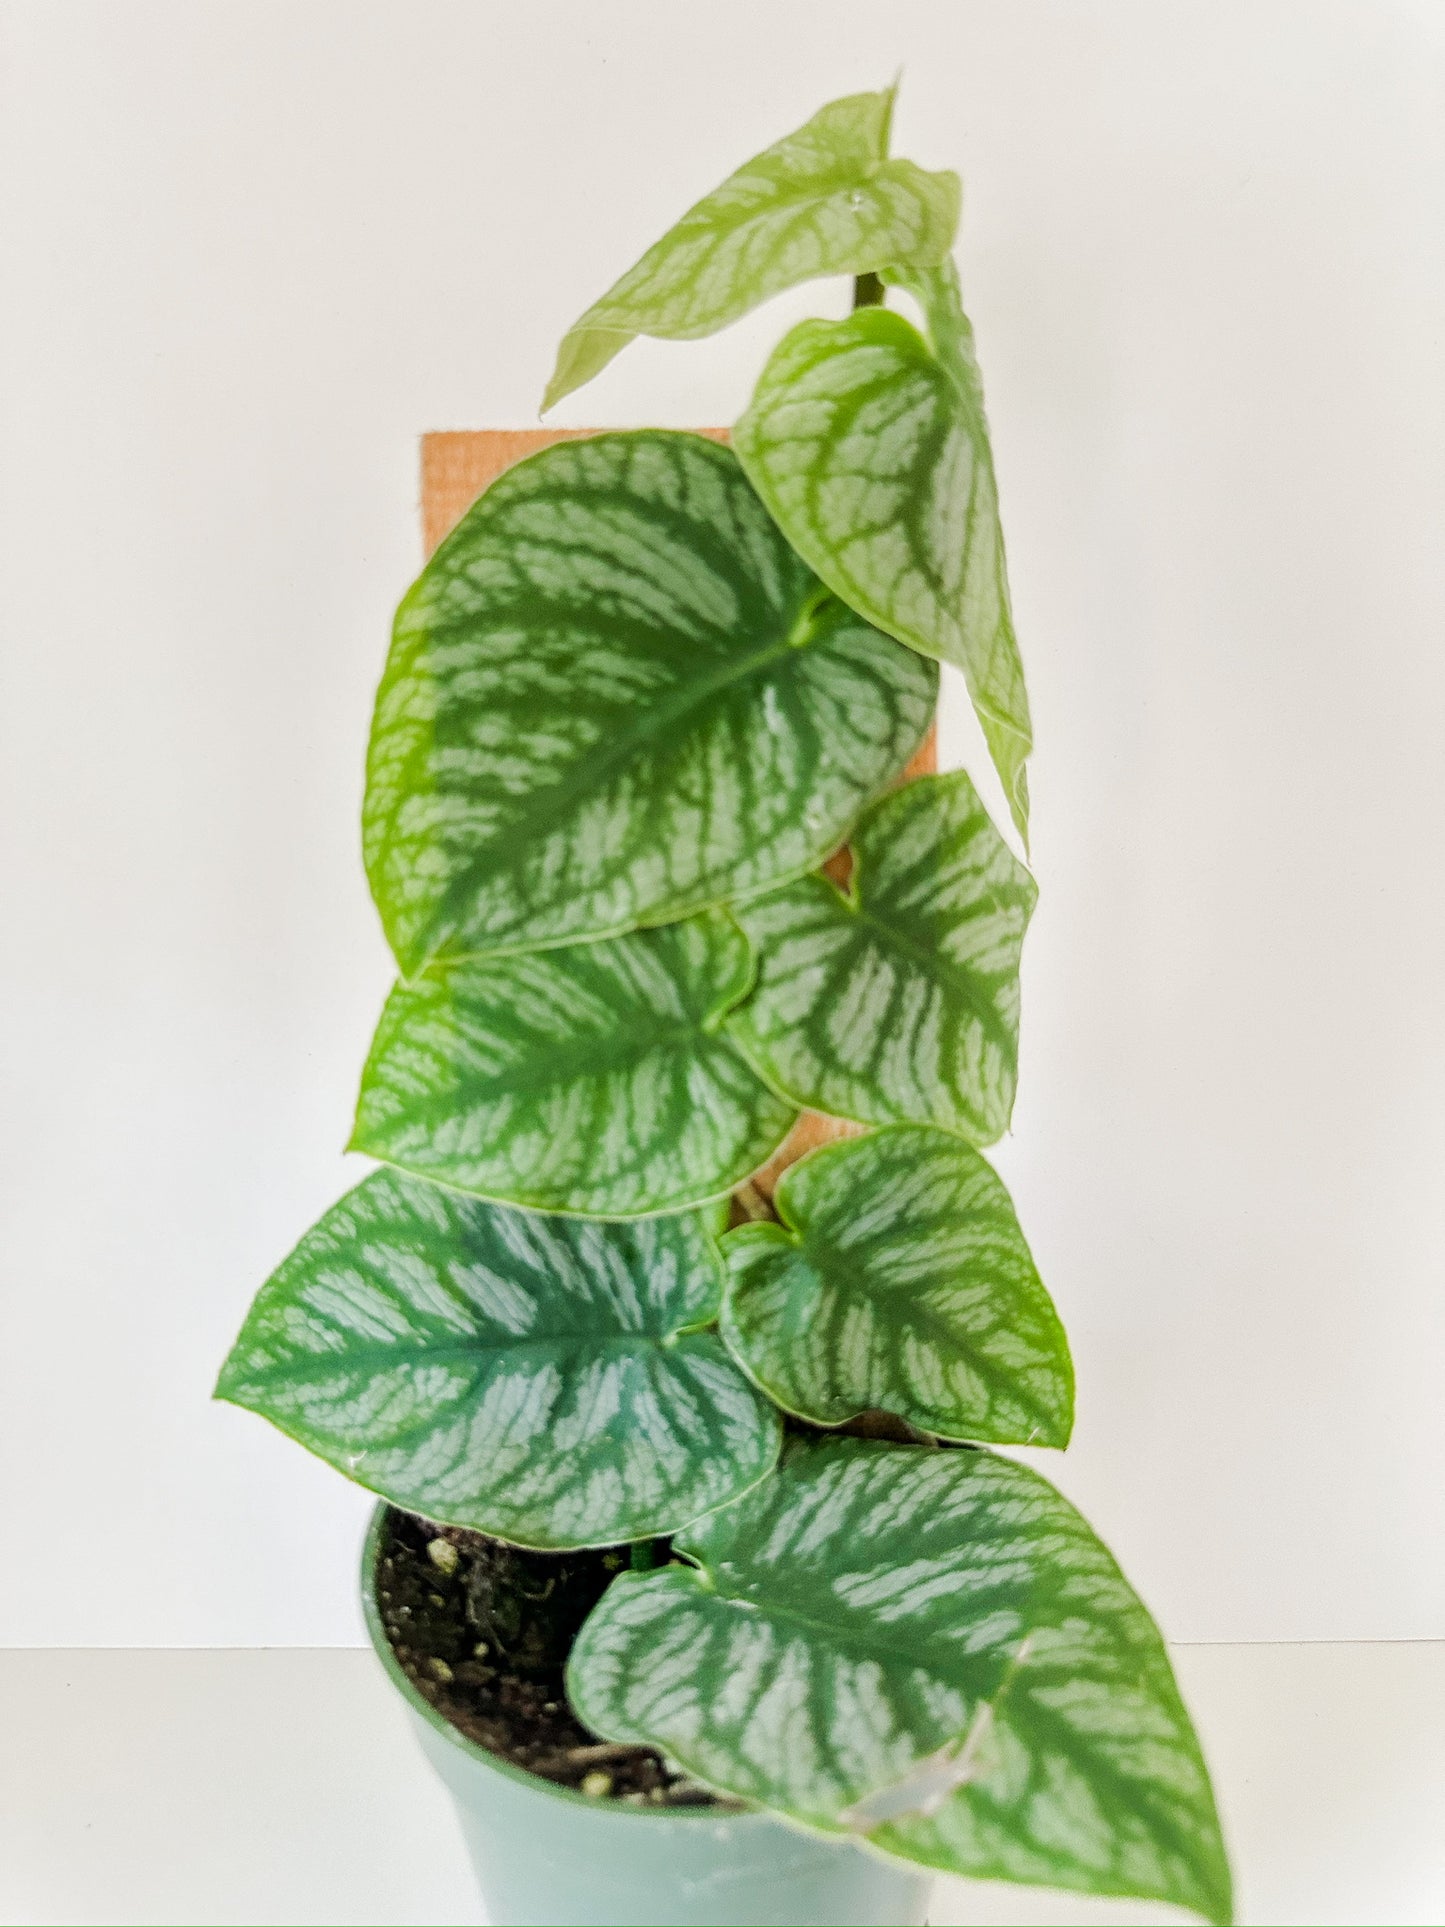 Monstera 'Dubia' (Shingle Plant)- Small Heart Shaped Leaves With Unique Patterned Leaves, Climbing Monstera- Tropical Houseplant- (4 Inch Nursery Pot)